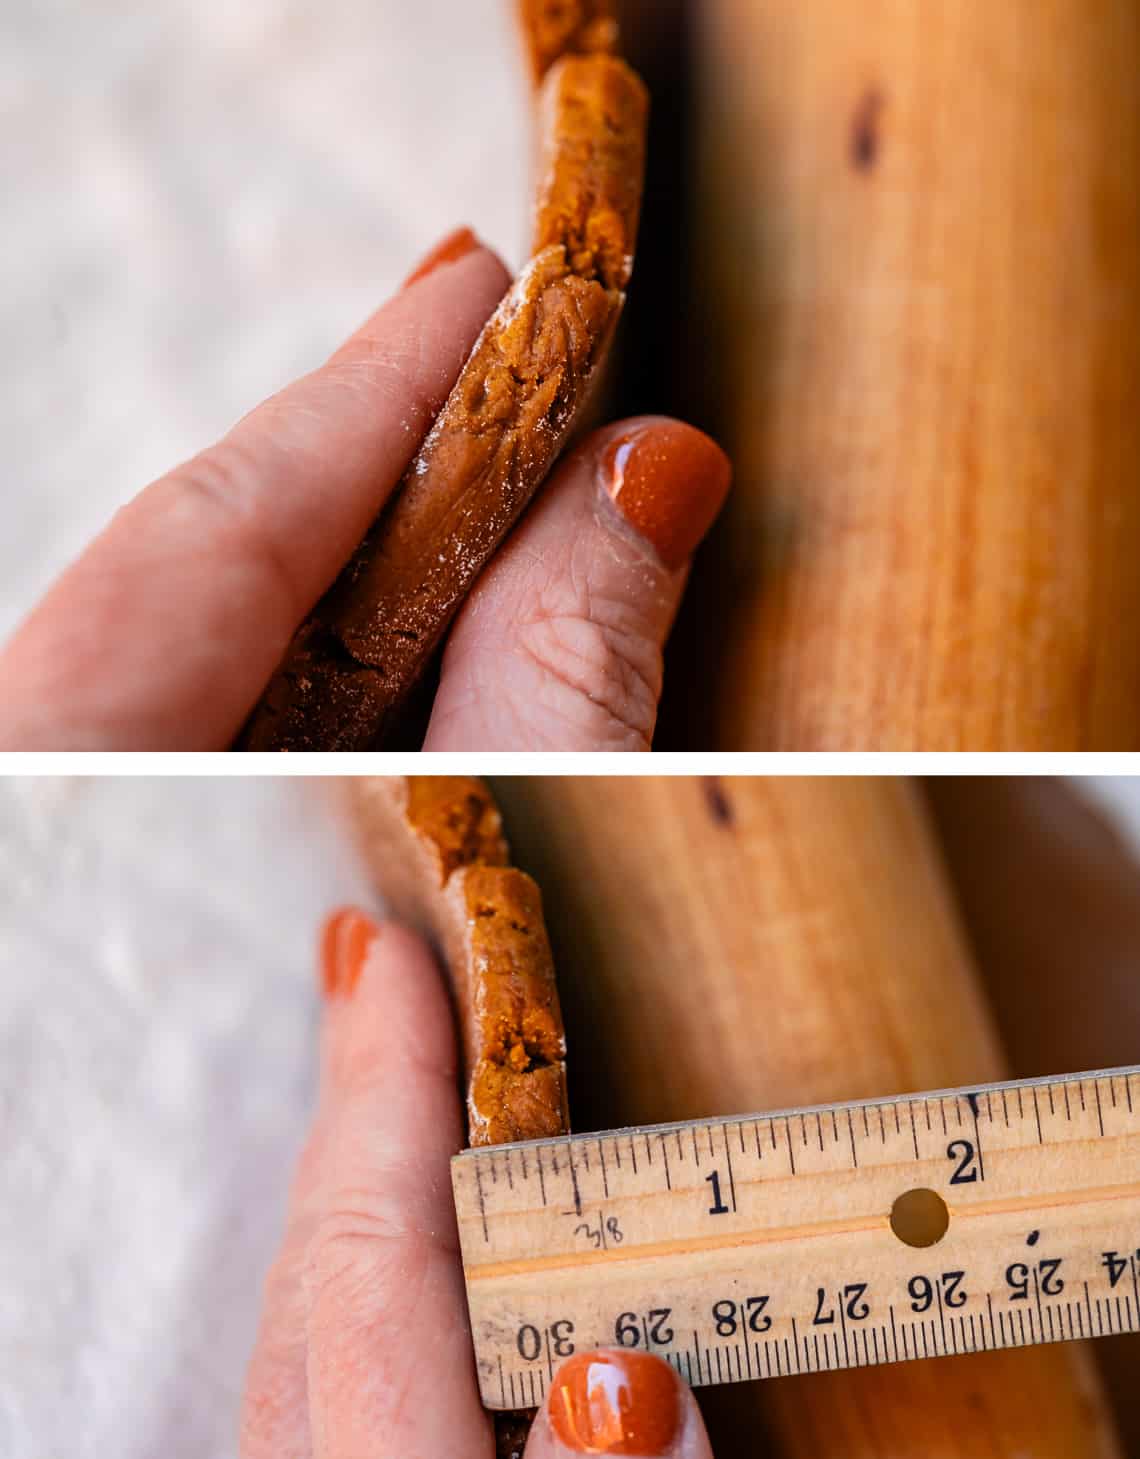 top showing with fingers the correct dough thickness, bottom 3/8" on a ruler thick.